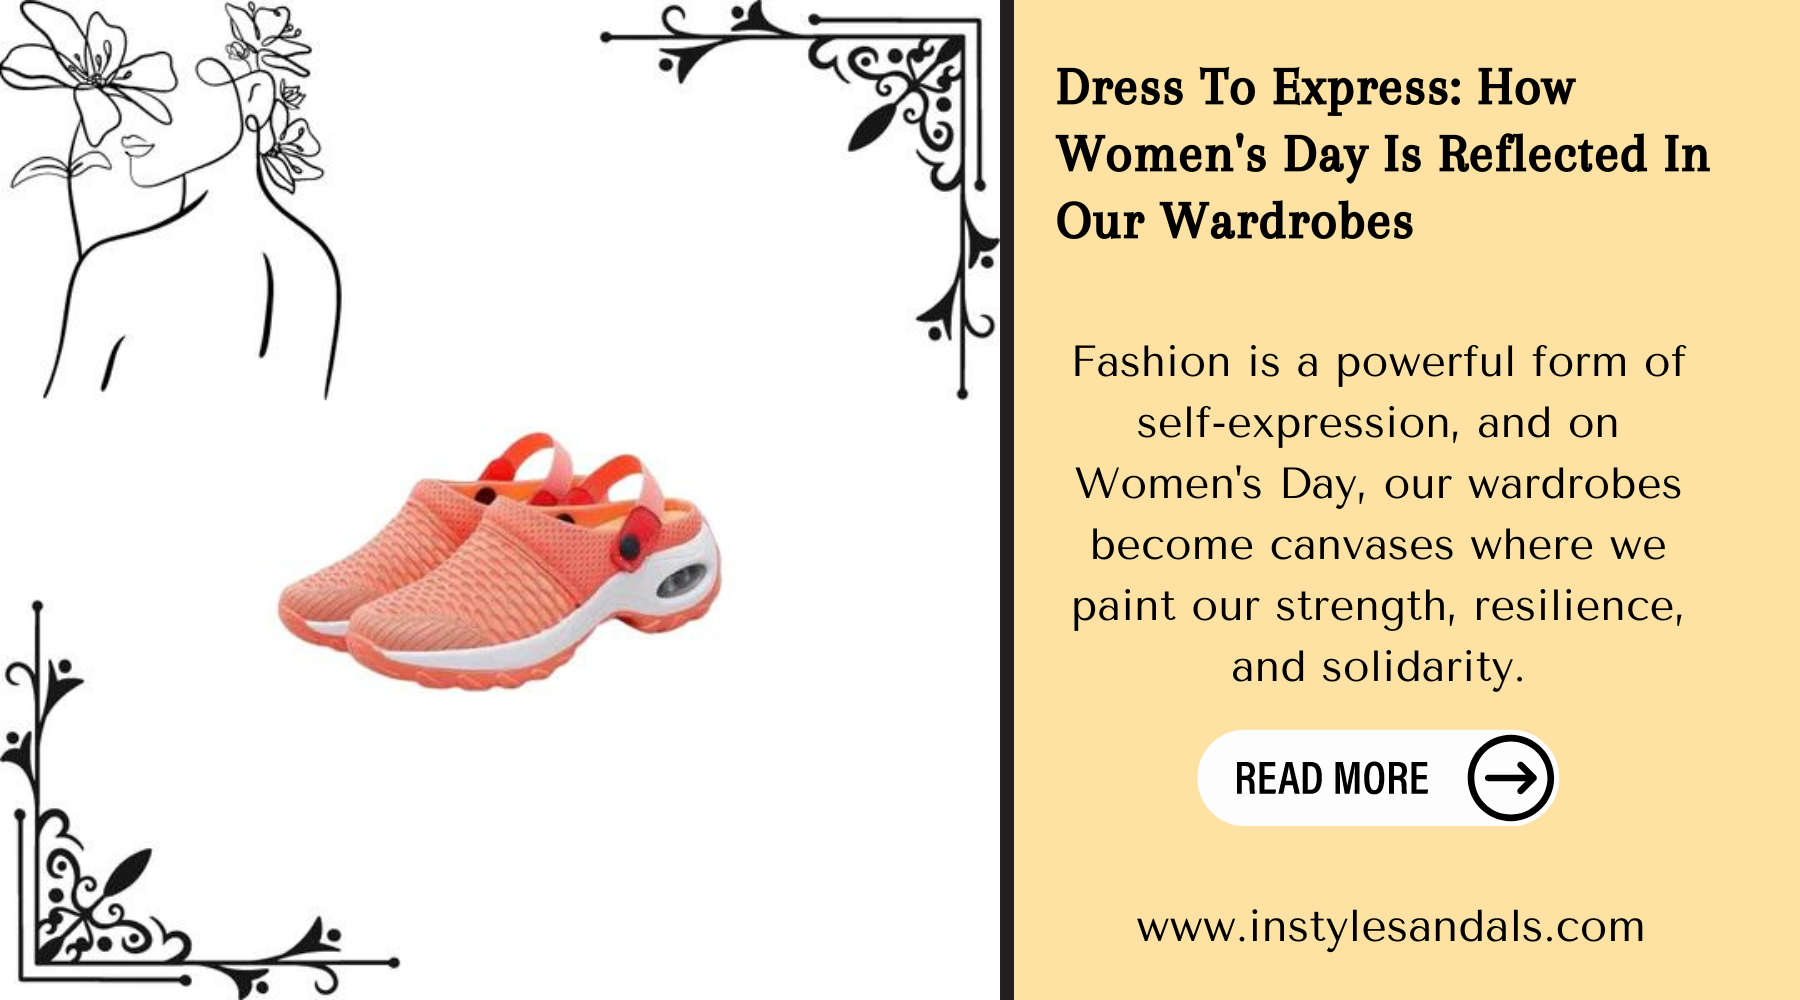 Dress To Express: How Women's Day Is Reflected In Our Wardrobes